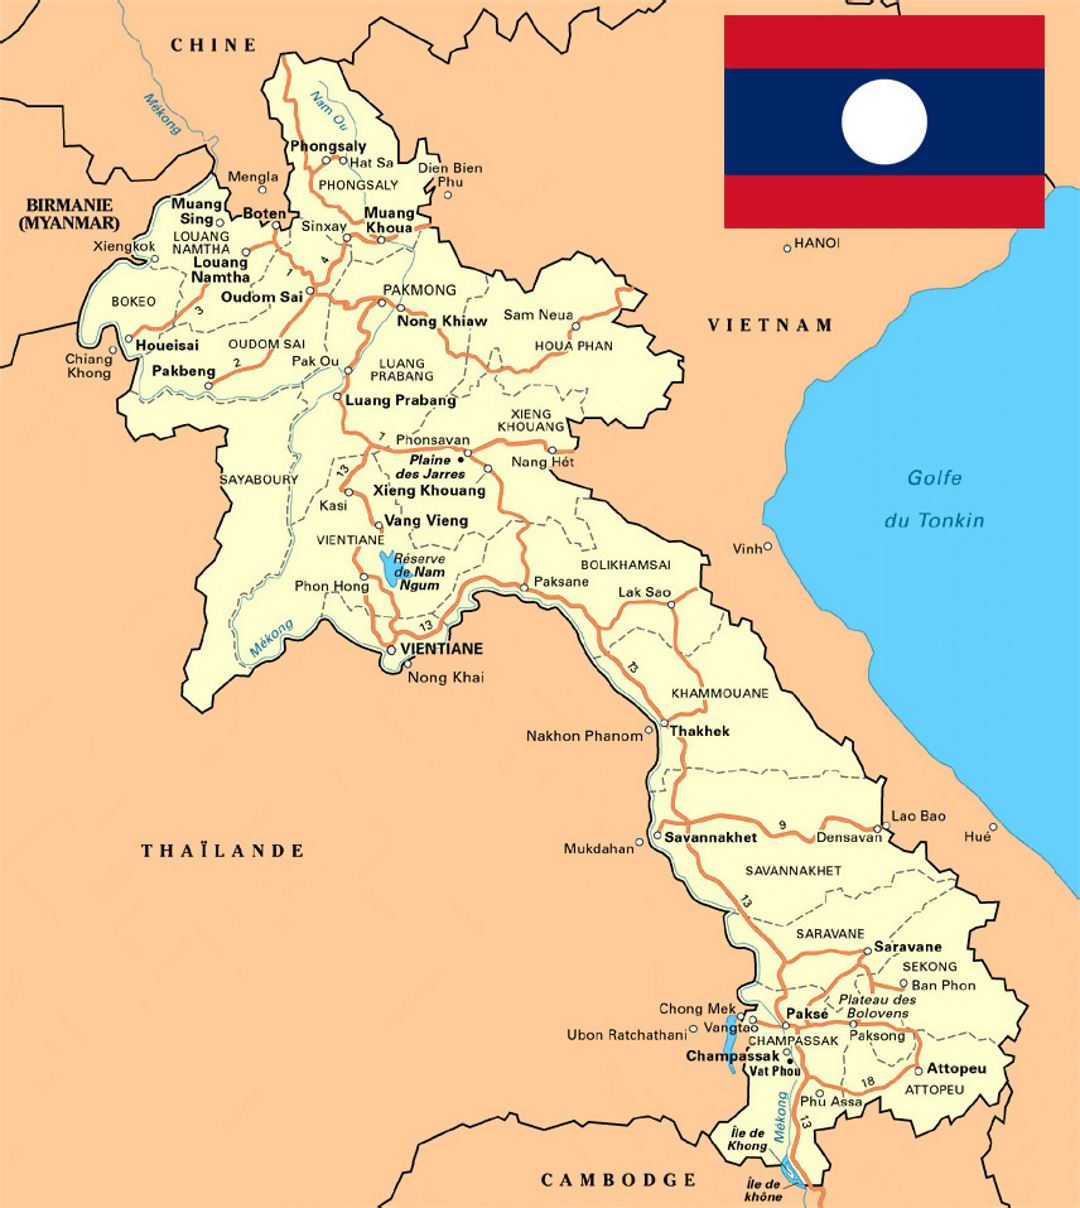 Detailed map of Laos with roads, cities and other marks